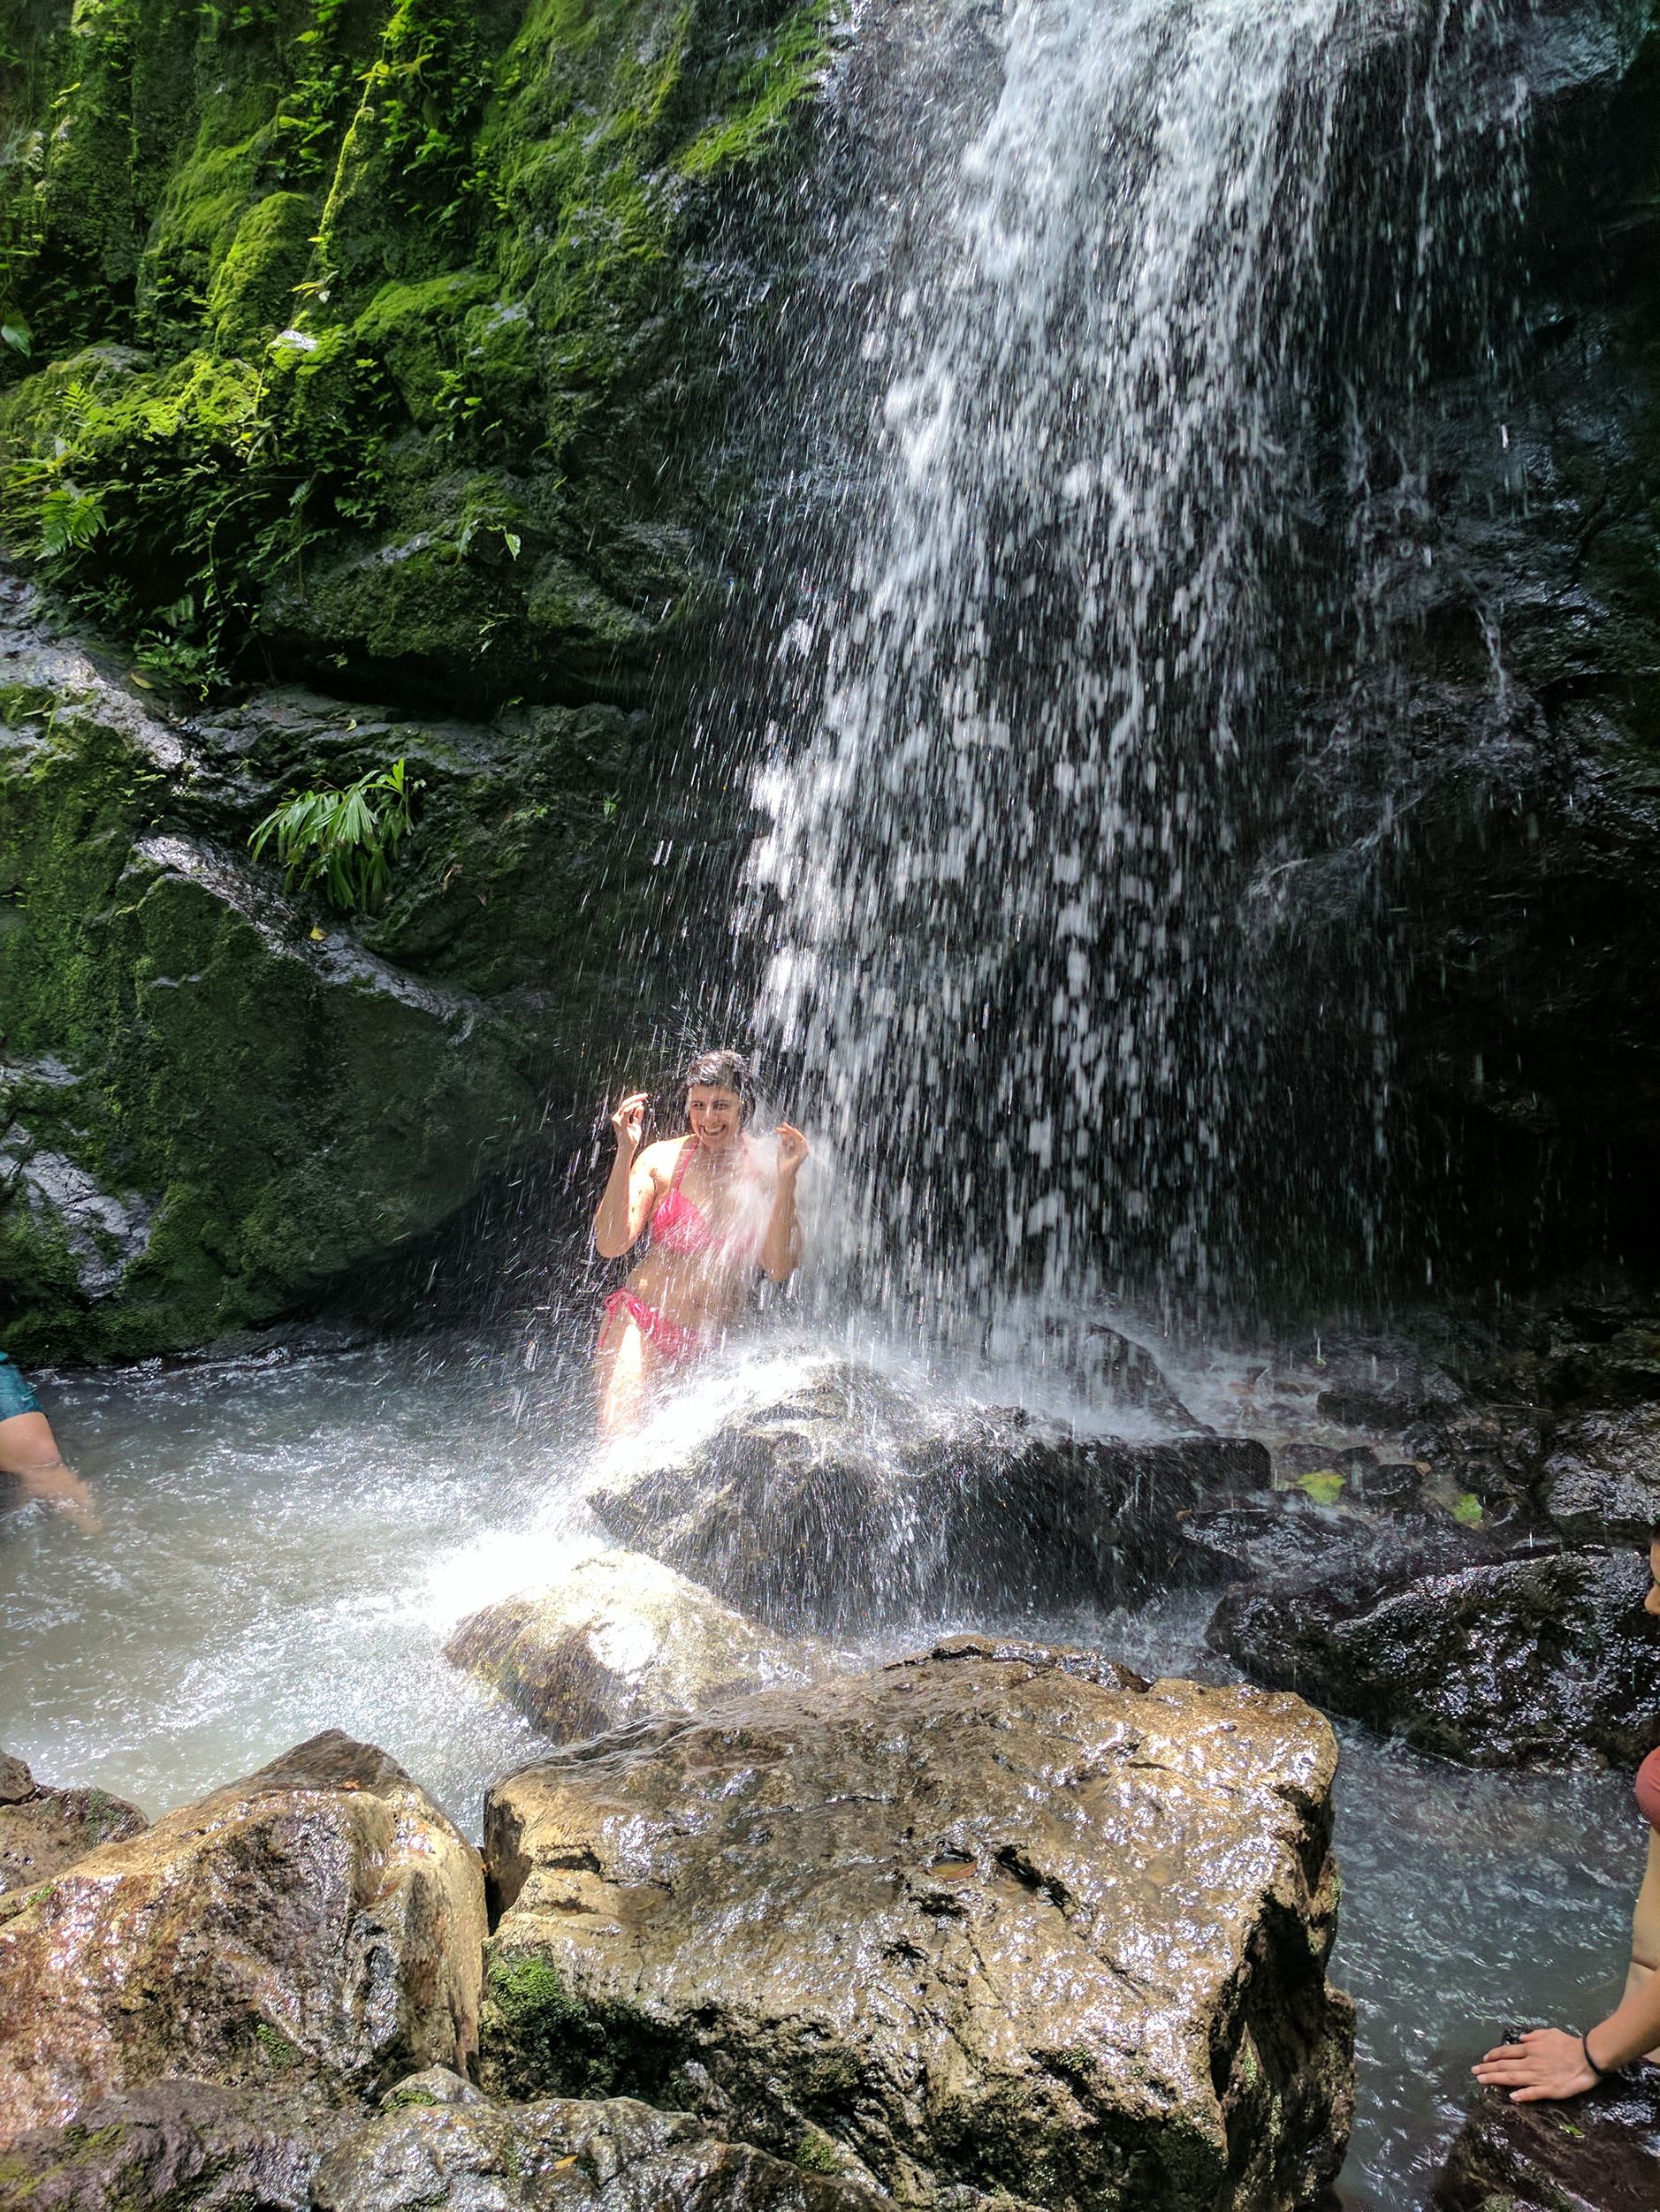 Student under waterfall in Costa Rica